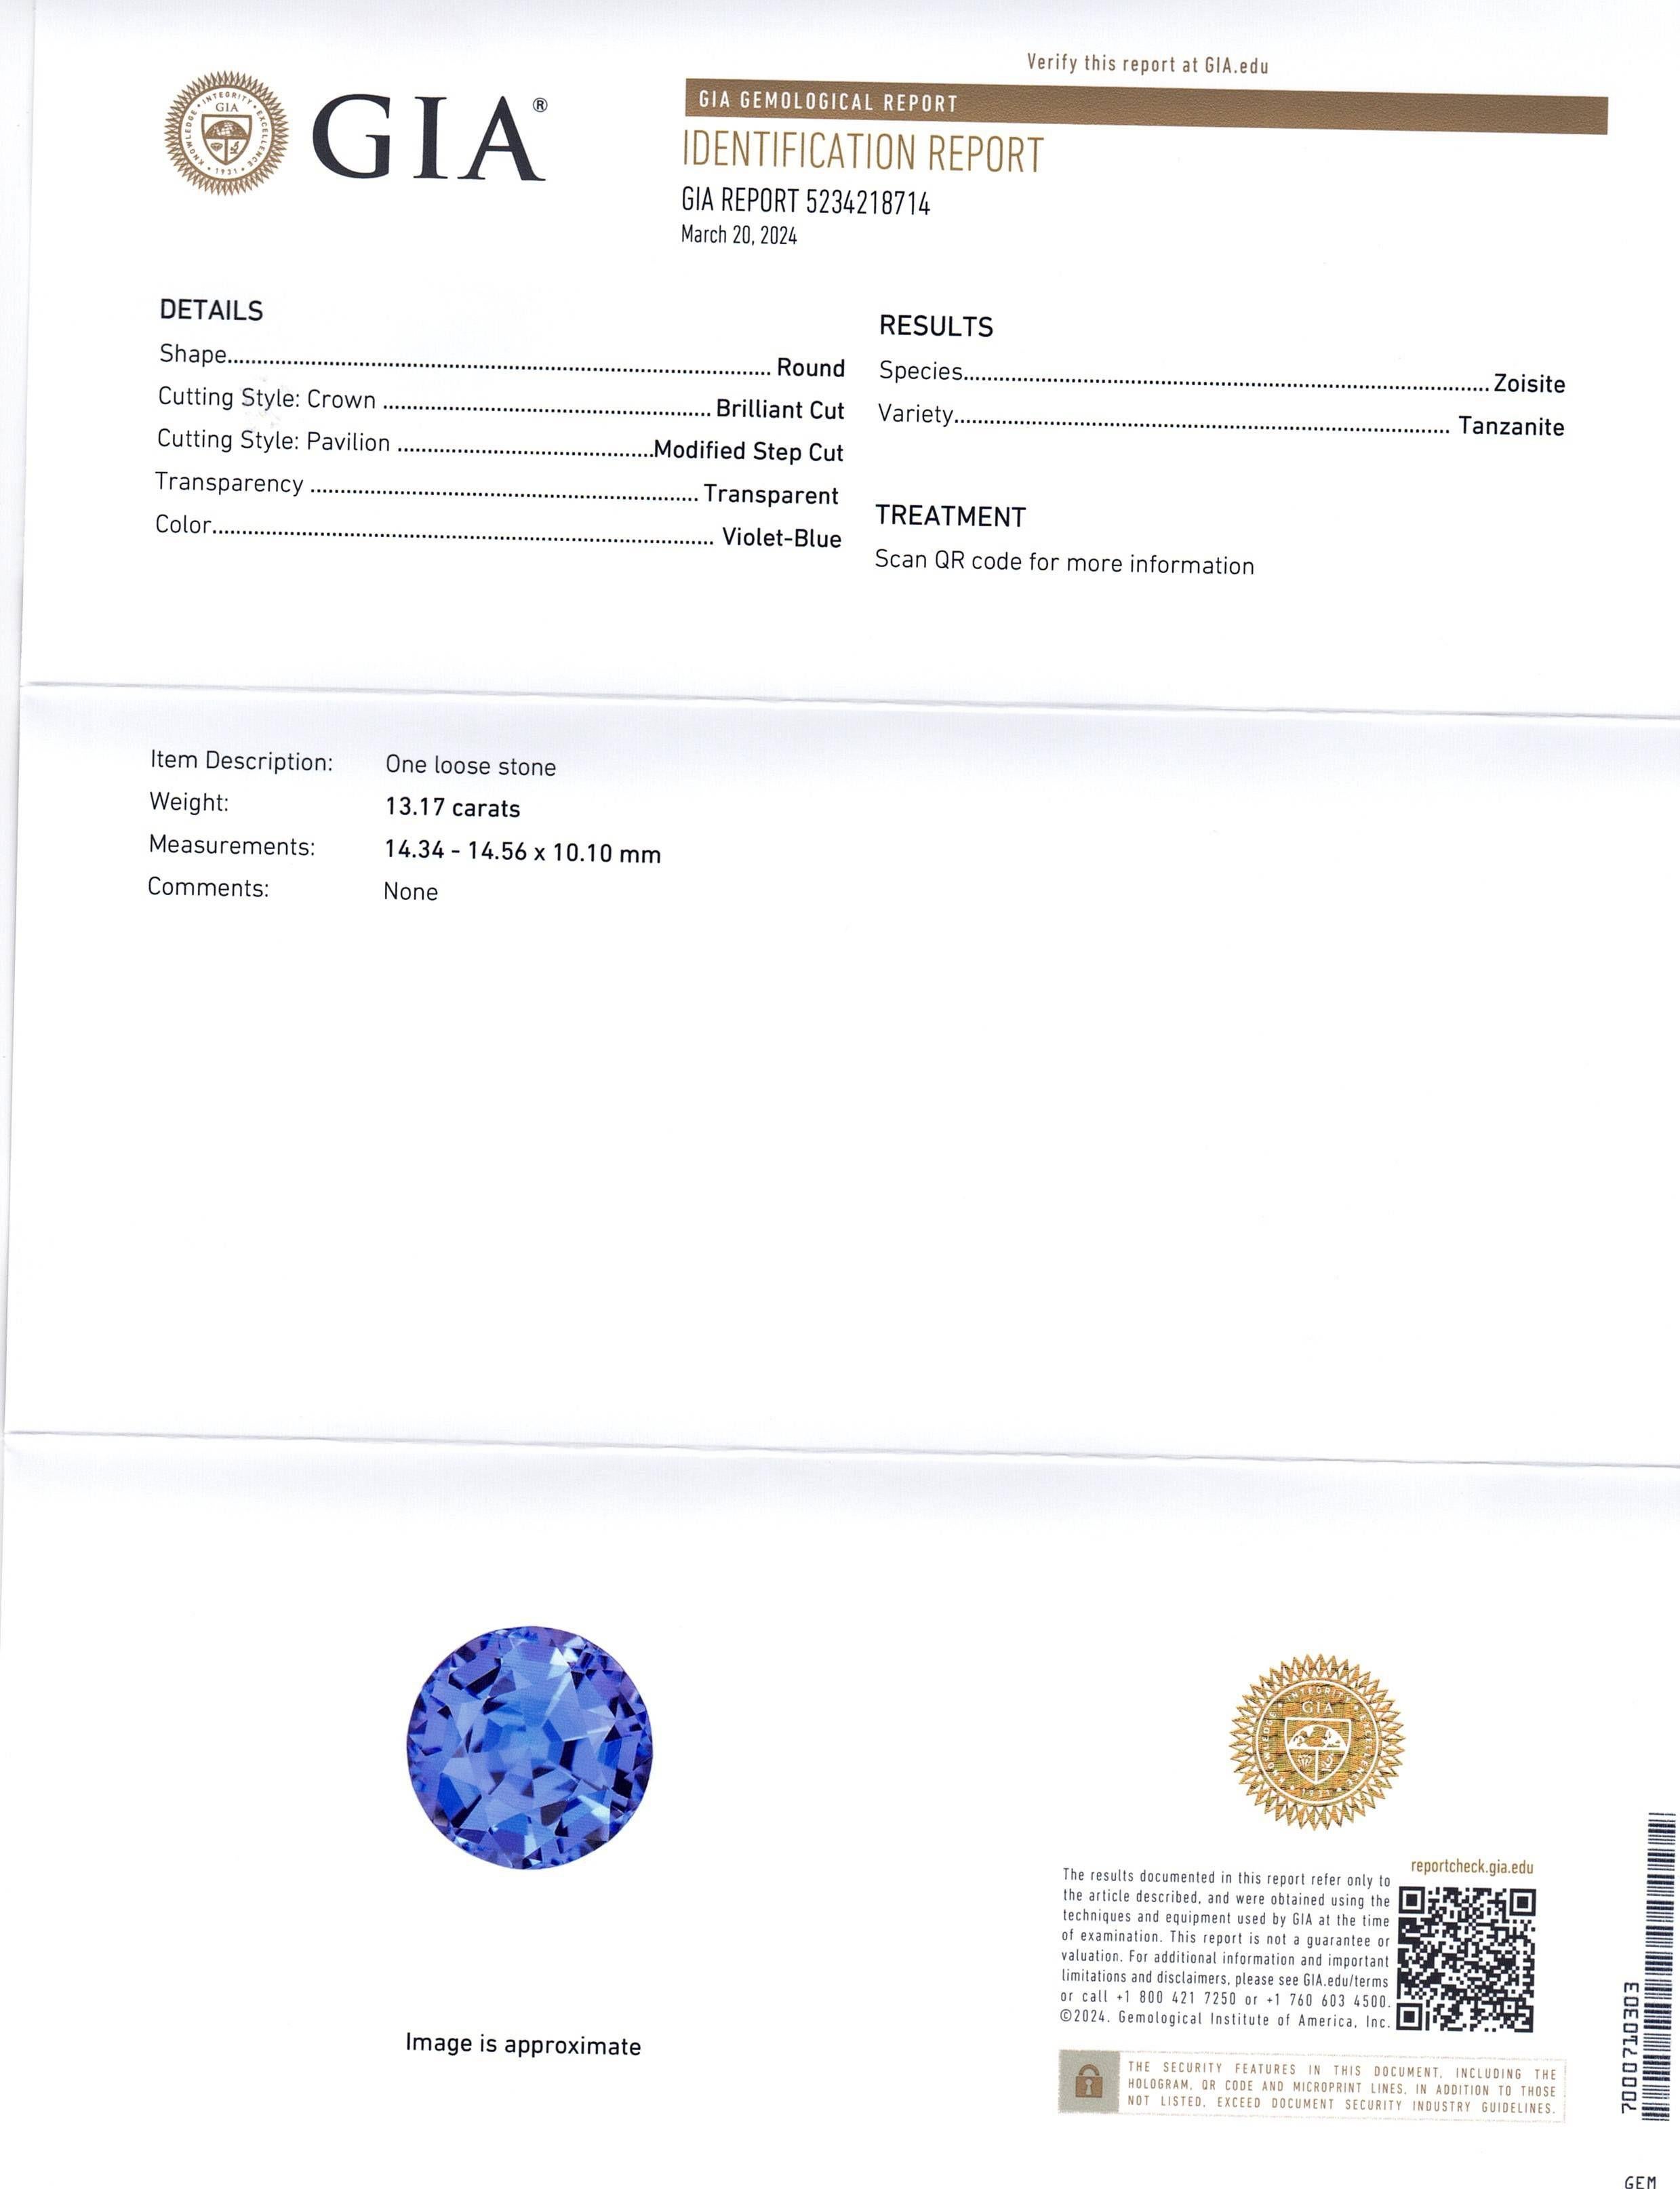 This is a stunning GIA Certified Tanzanite 


The GIA report reads as follows:

GIA Report Number: 5234218714
Shape: Round
Cutting Style: 
Cutting Style: Crown: Brilliant Cut
Cutting Style: Pavilion: Modified Step Cut
Transparency: